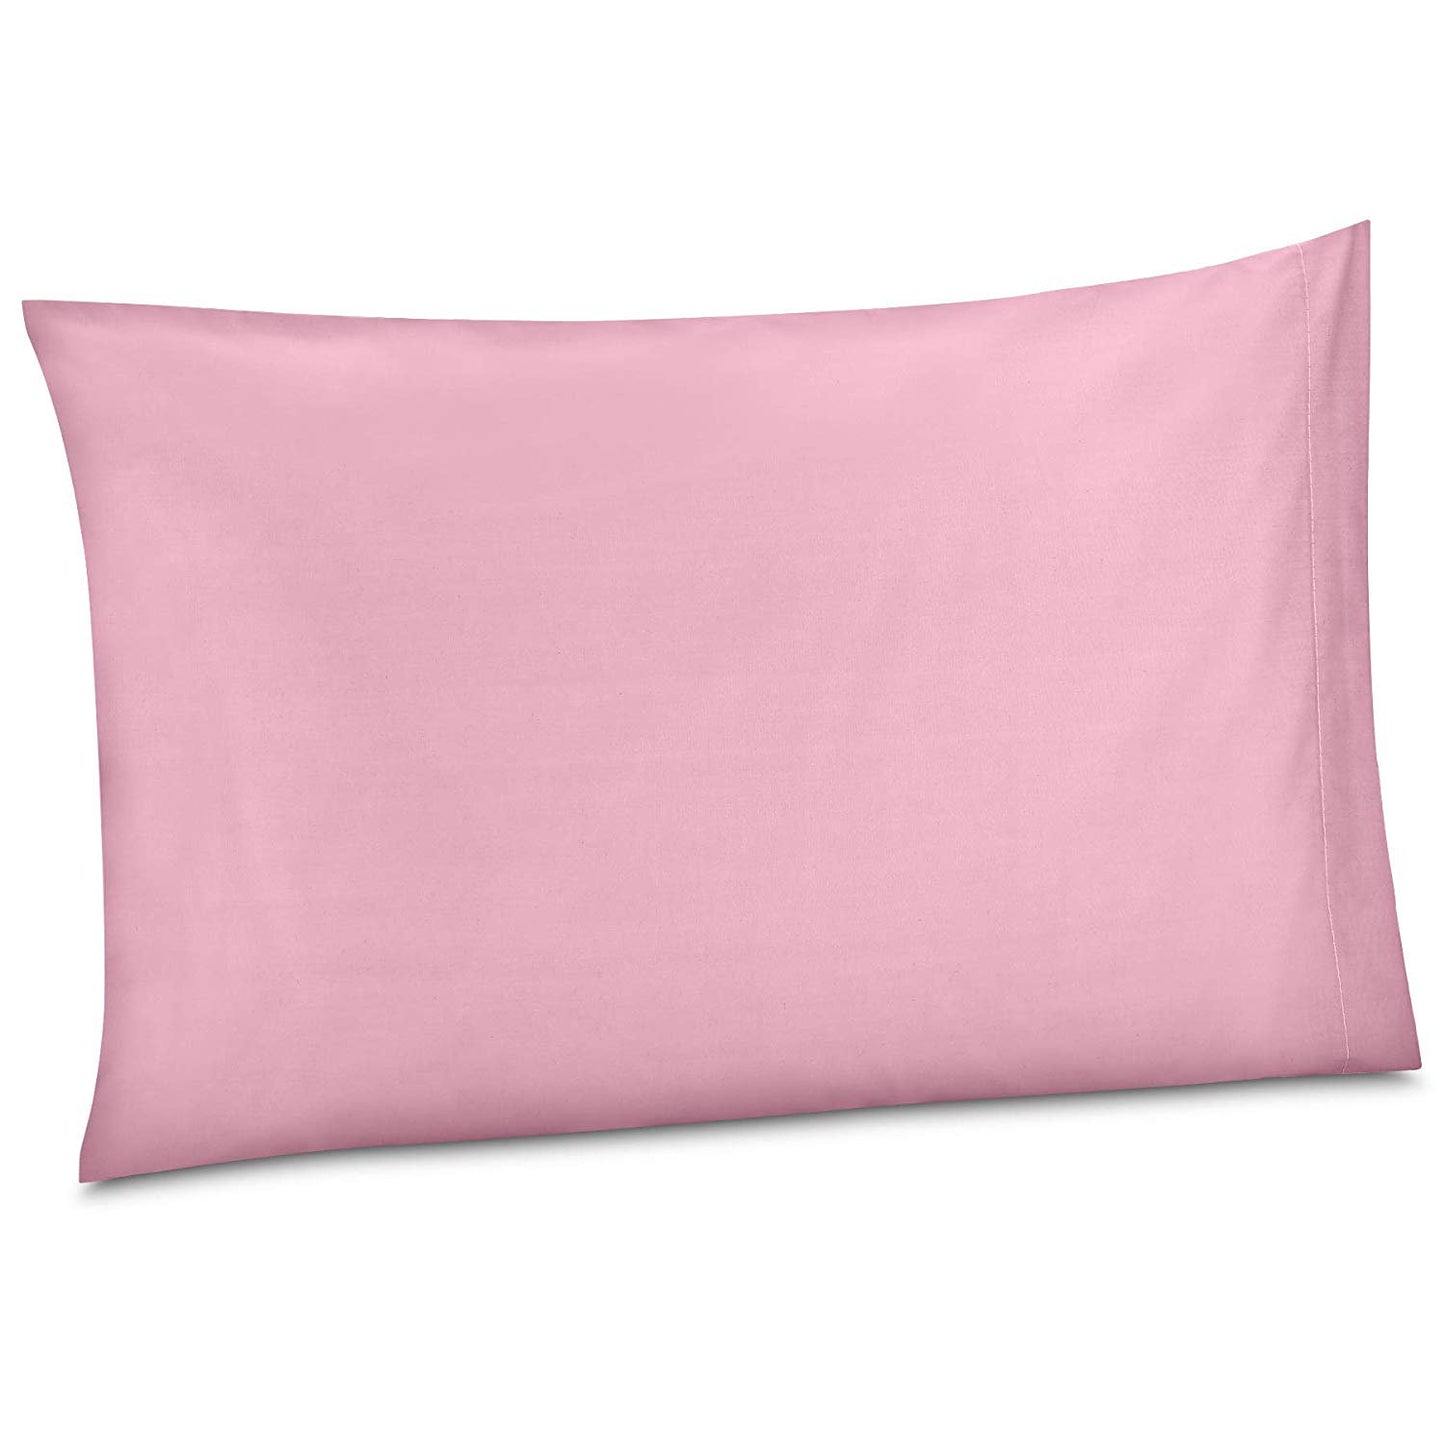 100% Cotton/Percale 210 Thread Count Pillow Cases Set of 2 Soft Pink Cotton Pillow Cover for Sleeping-Bedroom Pillowcases